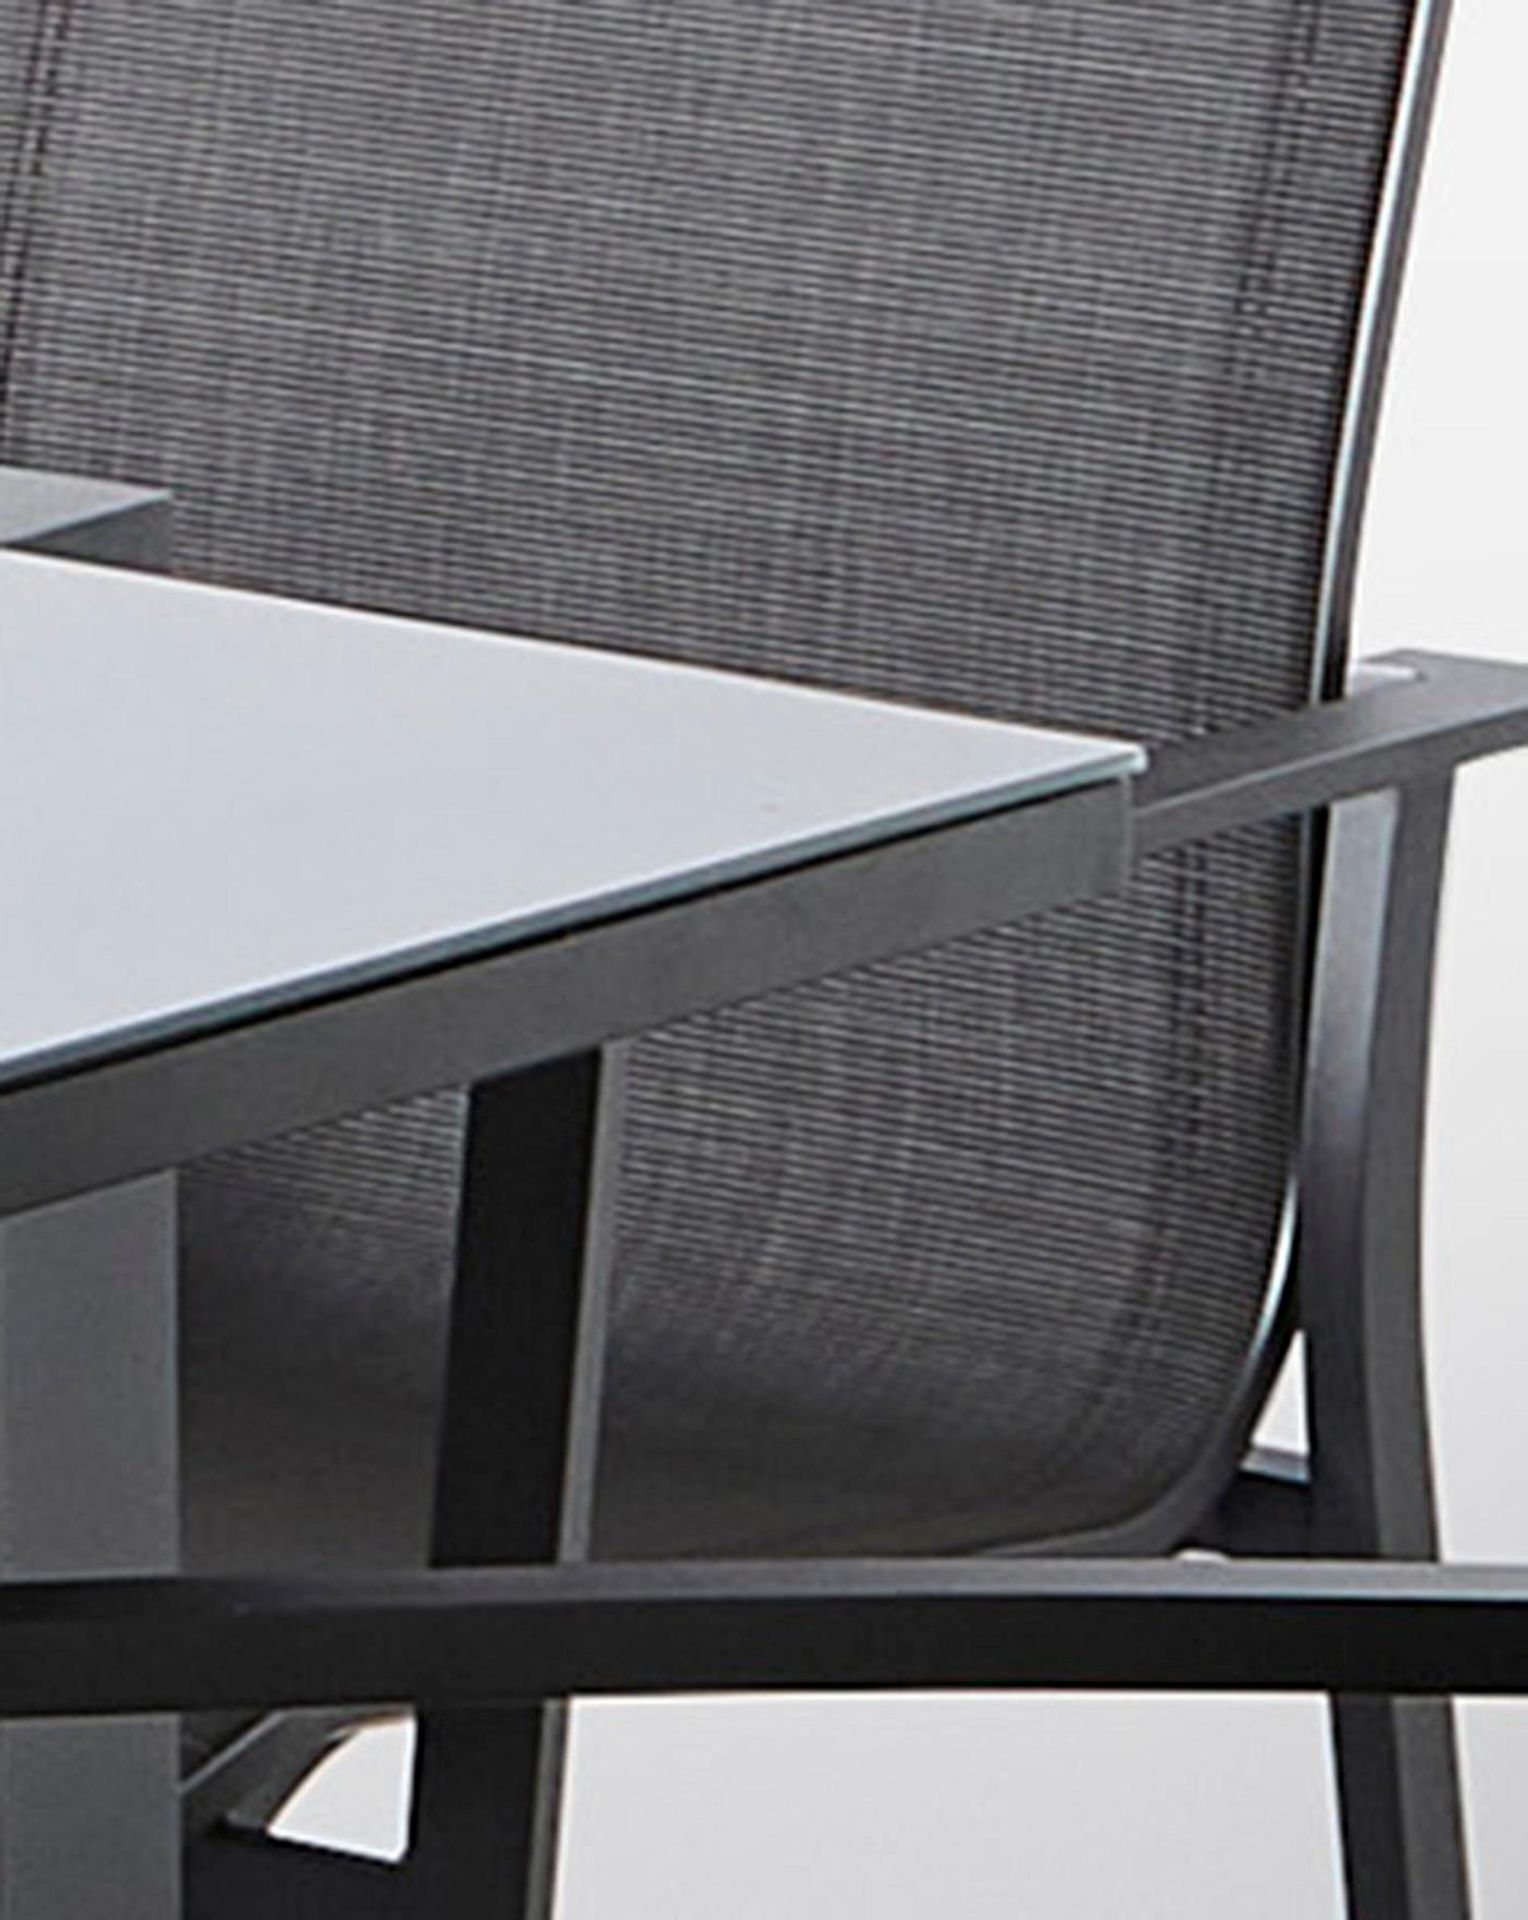 BRAND NEW Oslo 6 Seater Dining Set with Extendable Table. RRP £699 EACH. The Oslo Dining Set with - Bild 4 aus 4